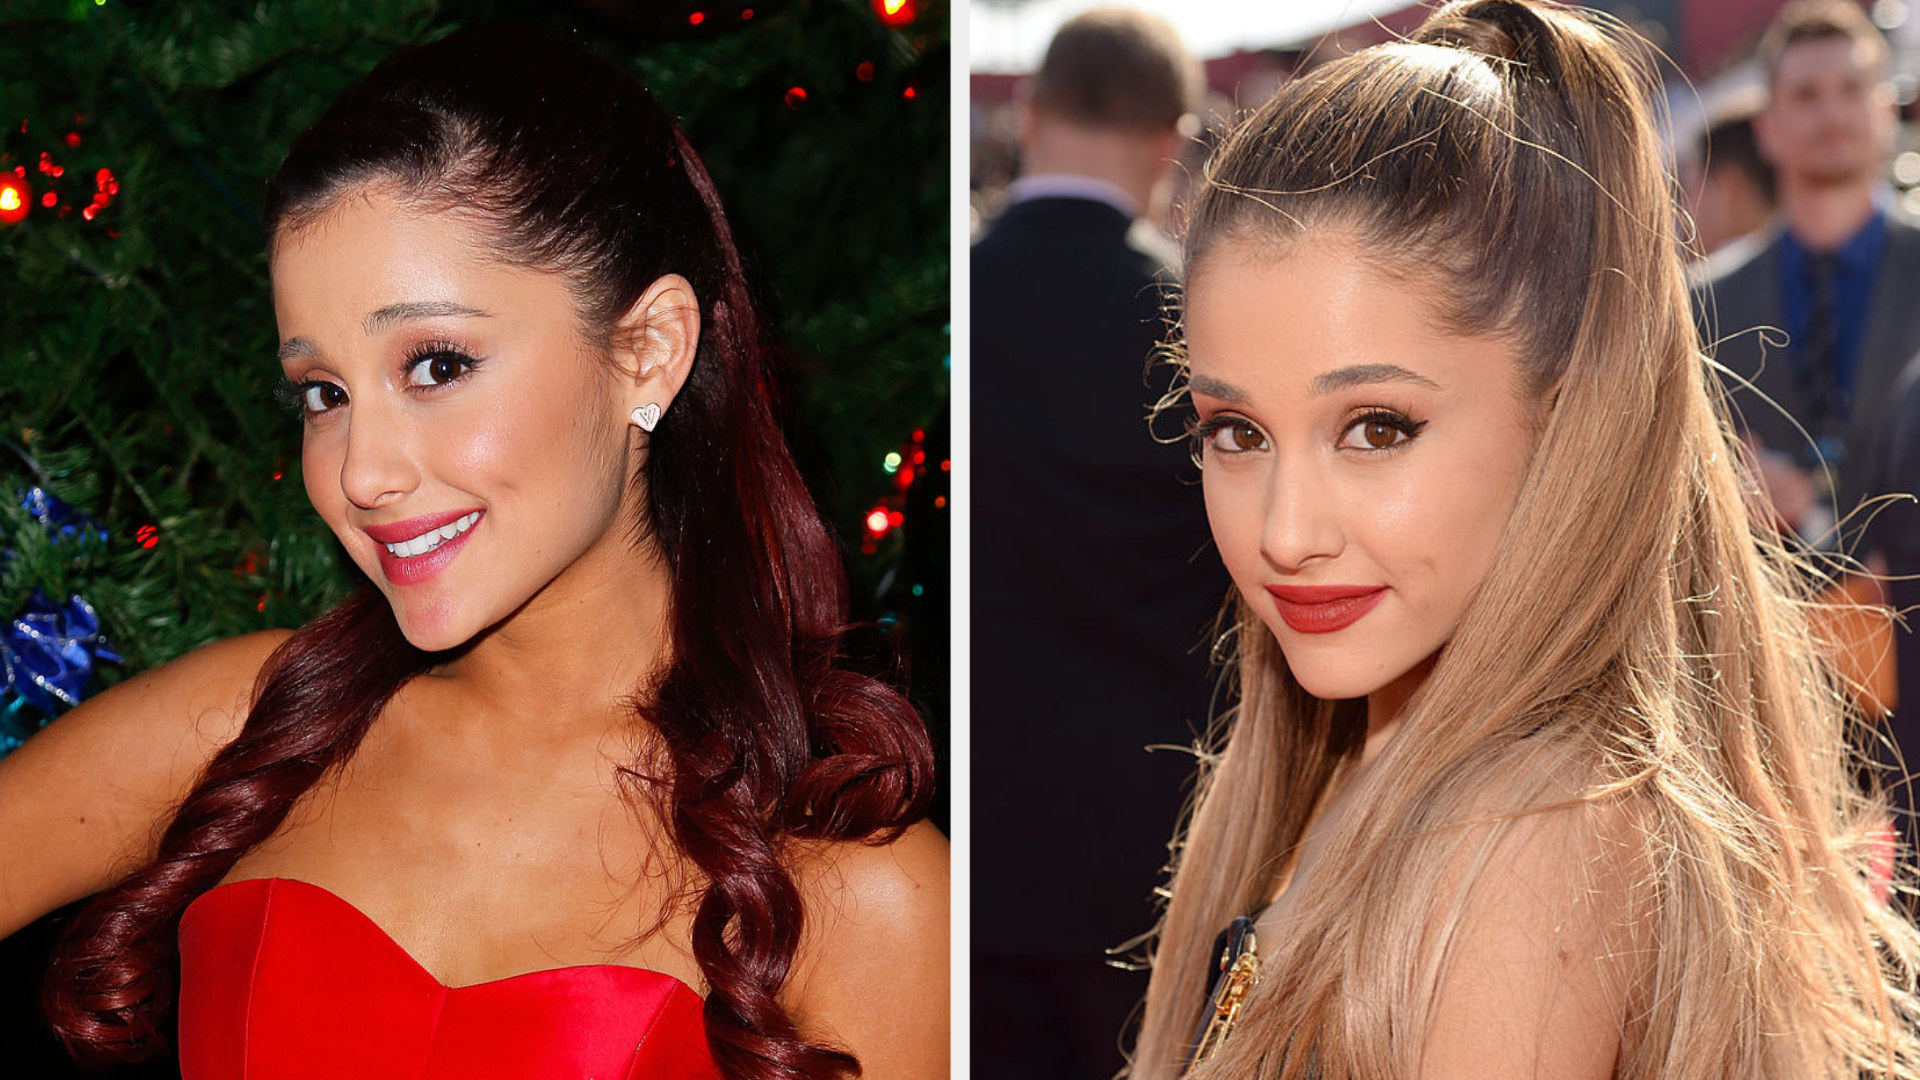 Ariana Grande with red hair and Ariana Grande with a blonde up-do